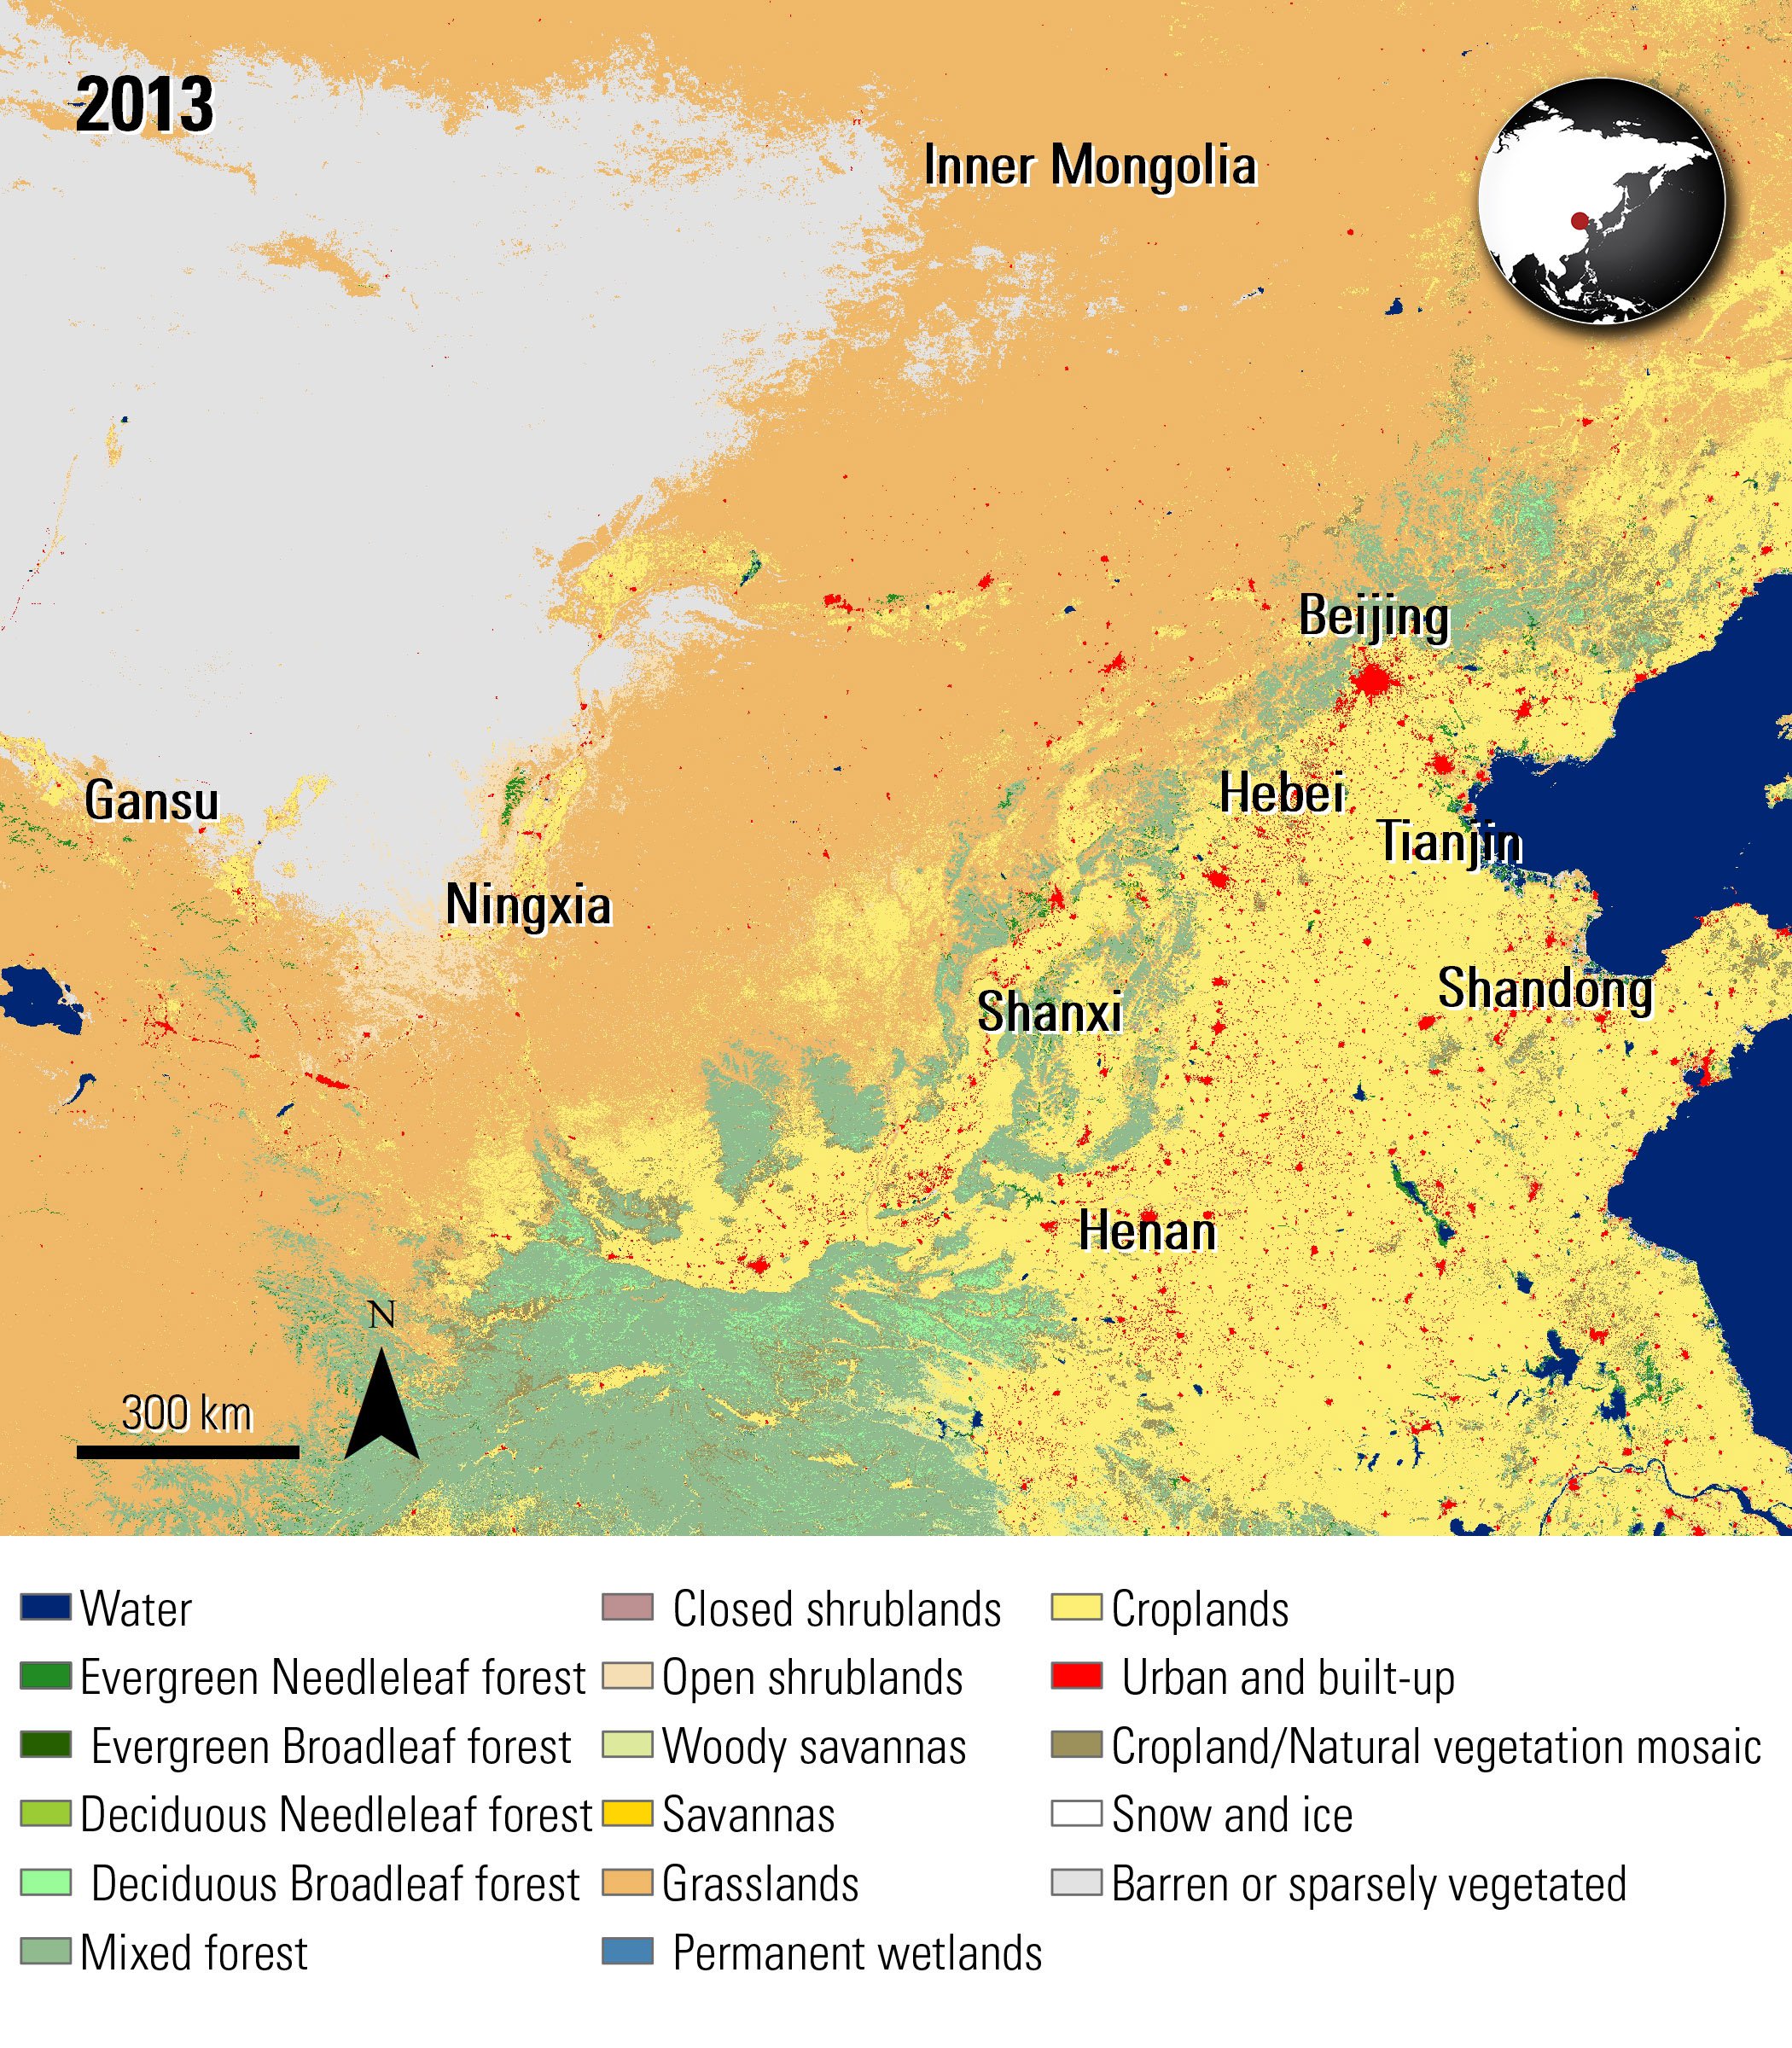 Combined MODIS Land Cover data over part of China, acquired in 2013.